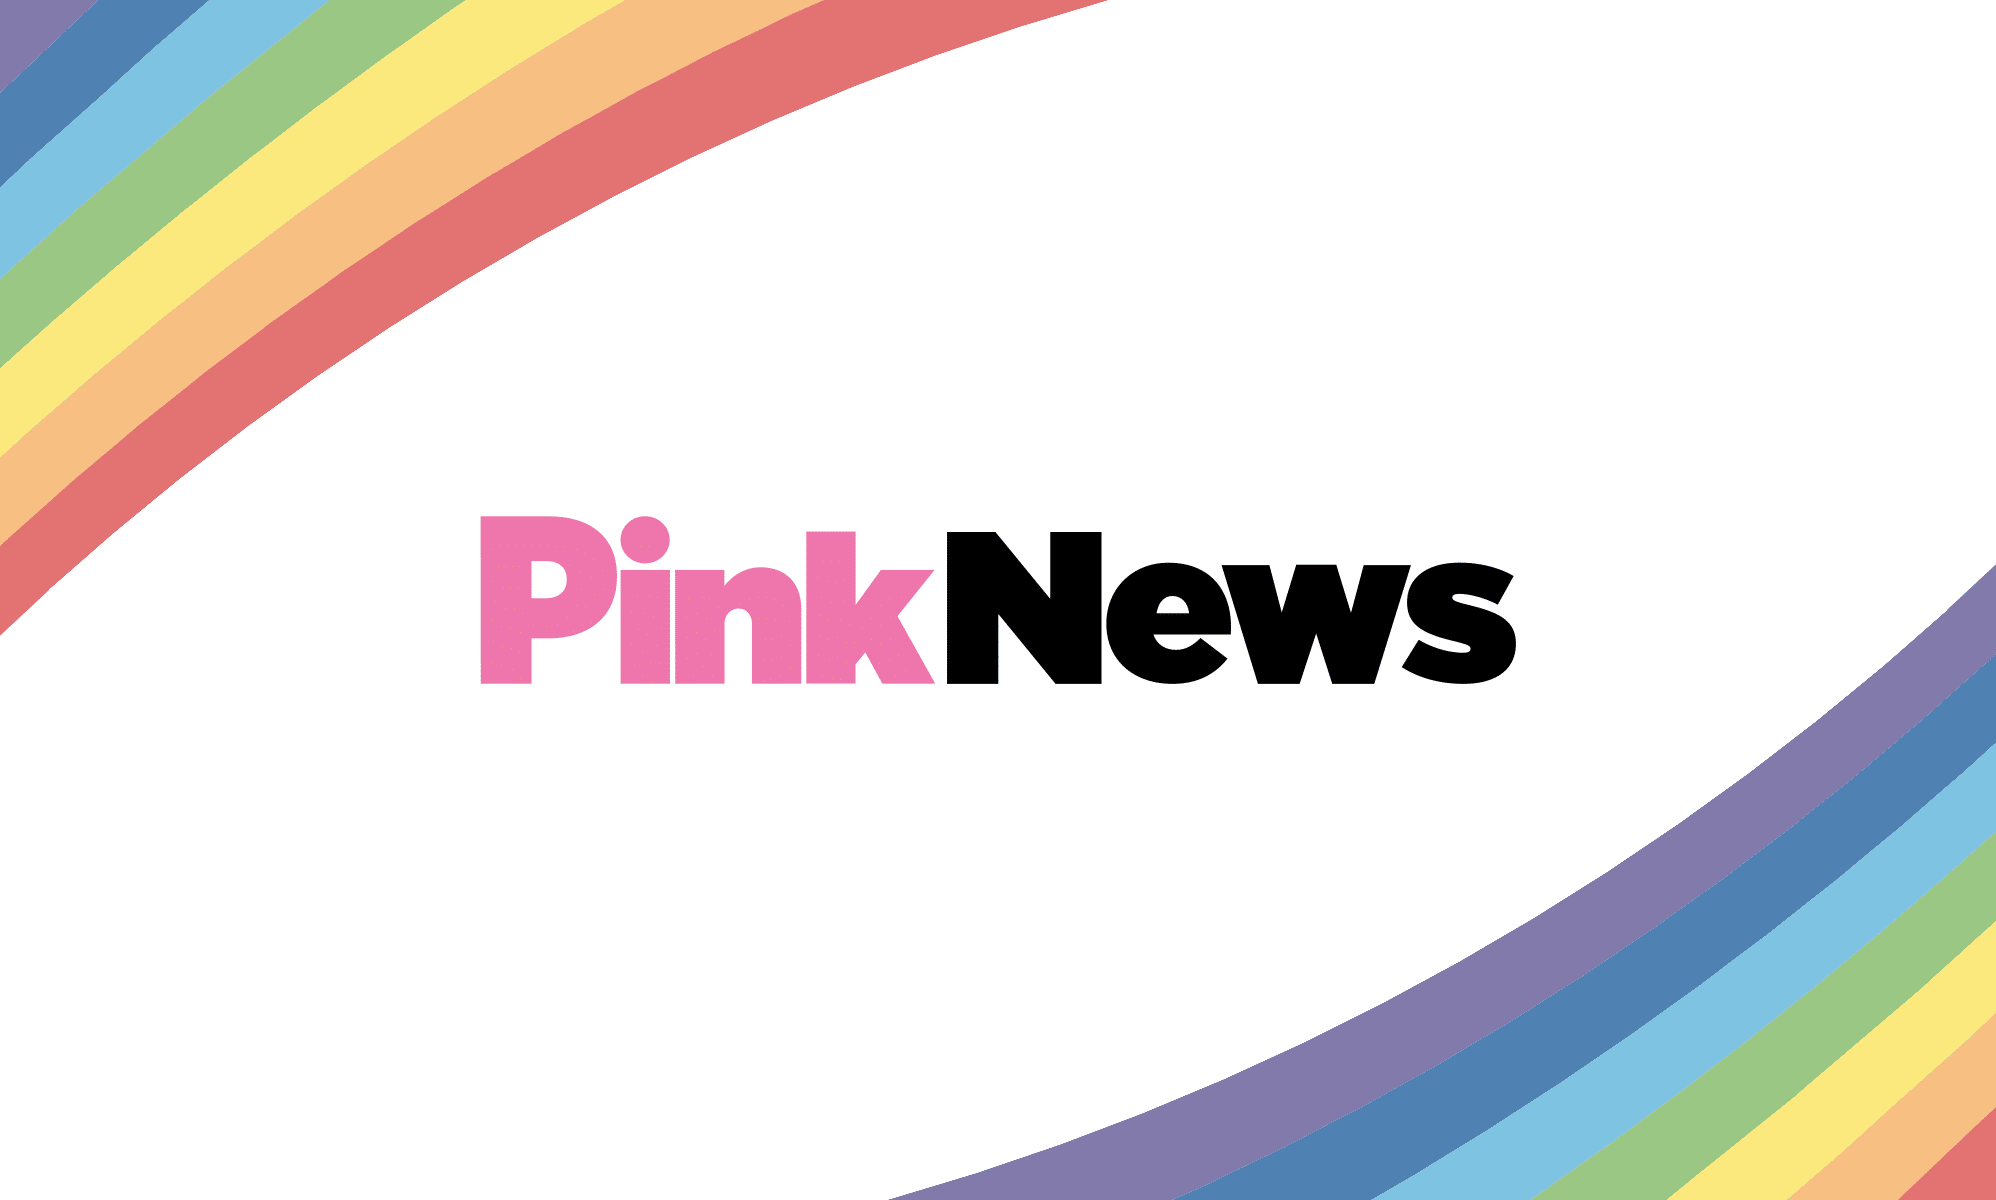 Tune in here to watch the PinkNews Debate with Evan Davis